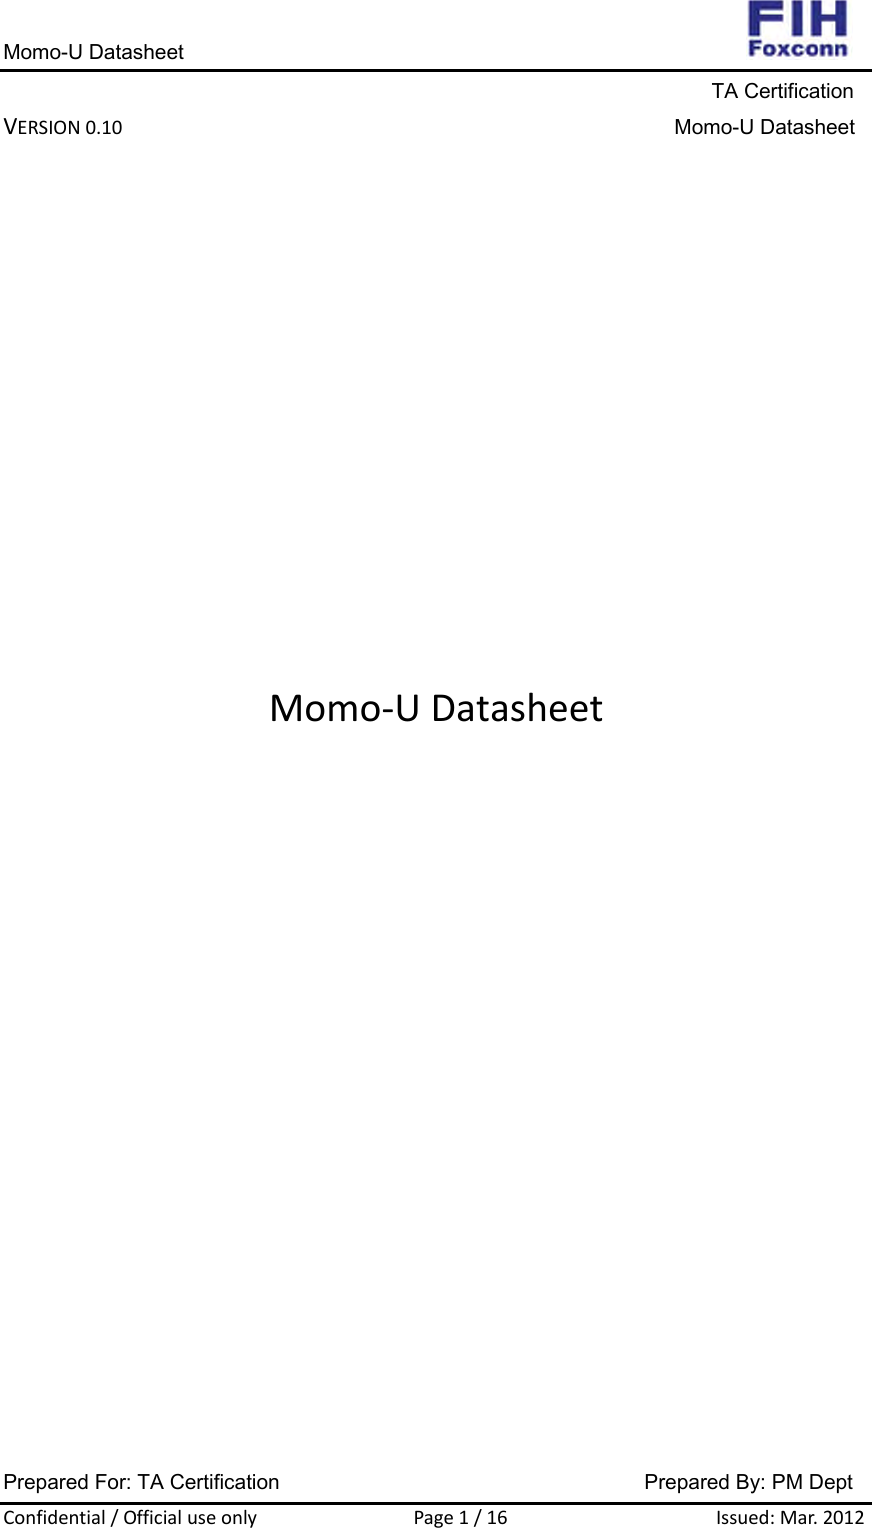 Momo-U Datasheet                                                                     TA Certification VERSION0.10Momo-U DatasheetPrepared For: TA Certification                                     Prepared By: PM Dept Confidential/OfficialuseonlyPage1/16Issued:Mar.2012       Momo‐UDatasheet